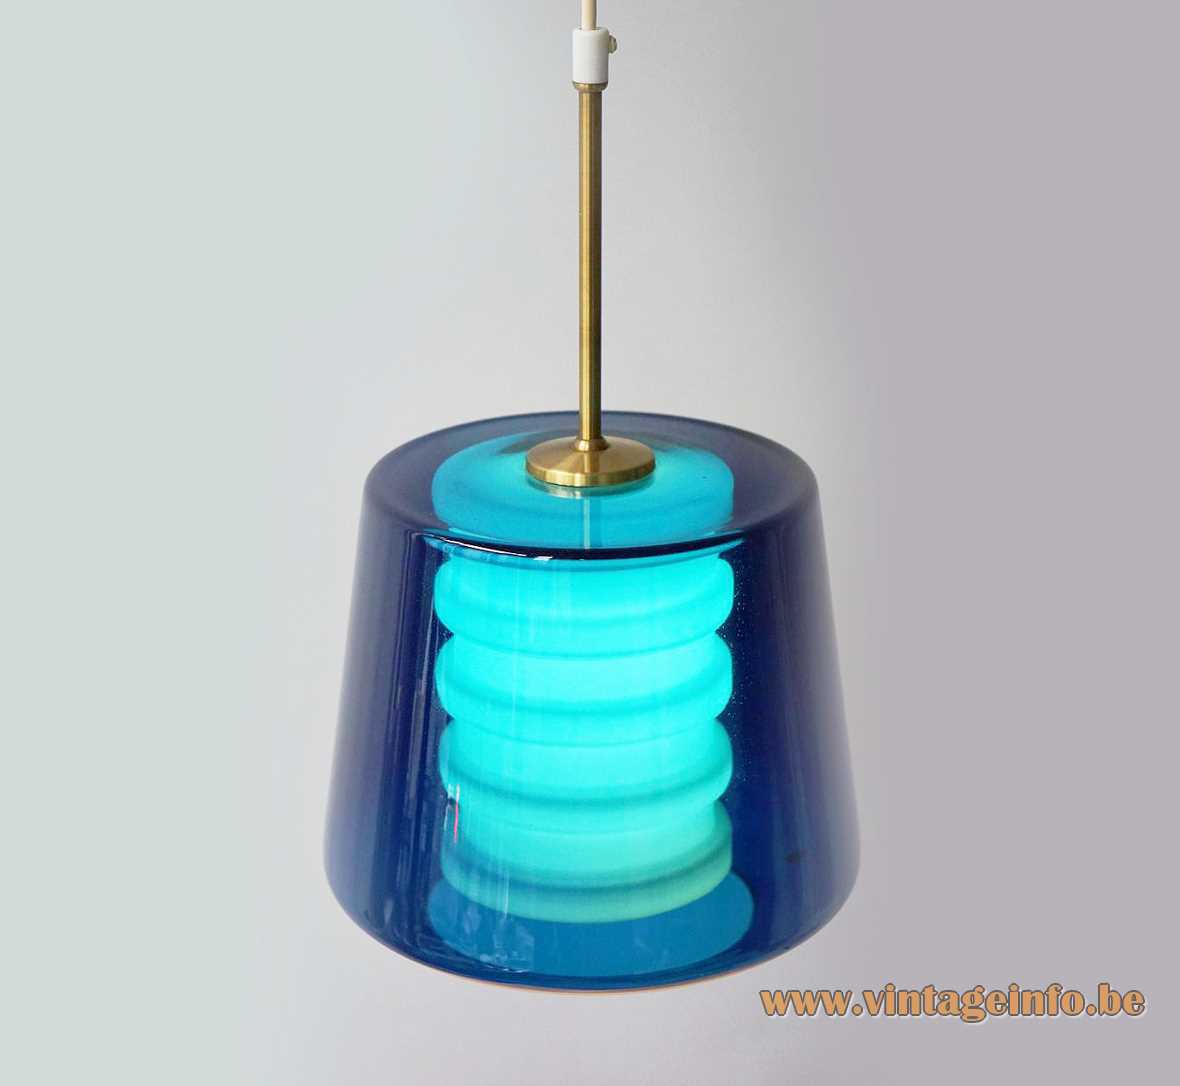 Philips Torino pendant lamp conical dark blue clear blown glass opal ribbed cylinder brass rod 1960s